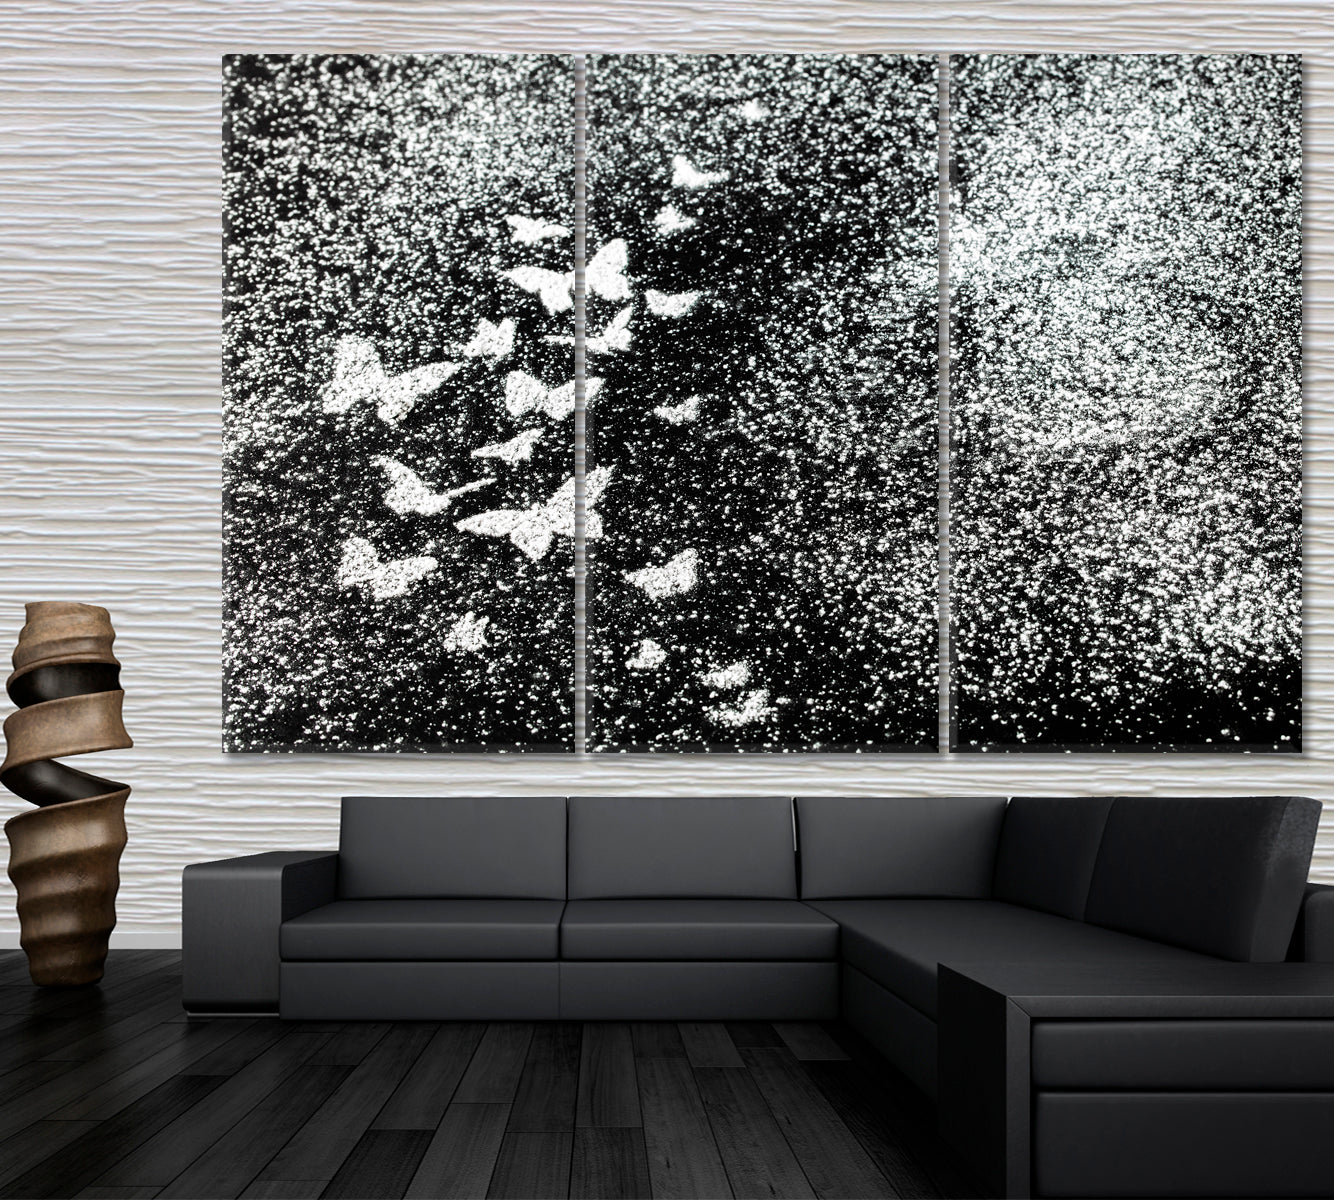 BUTTERFLY Black And White Beautiful Tender Canvas Print Black and White Wall Art Print Artesty   